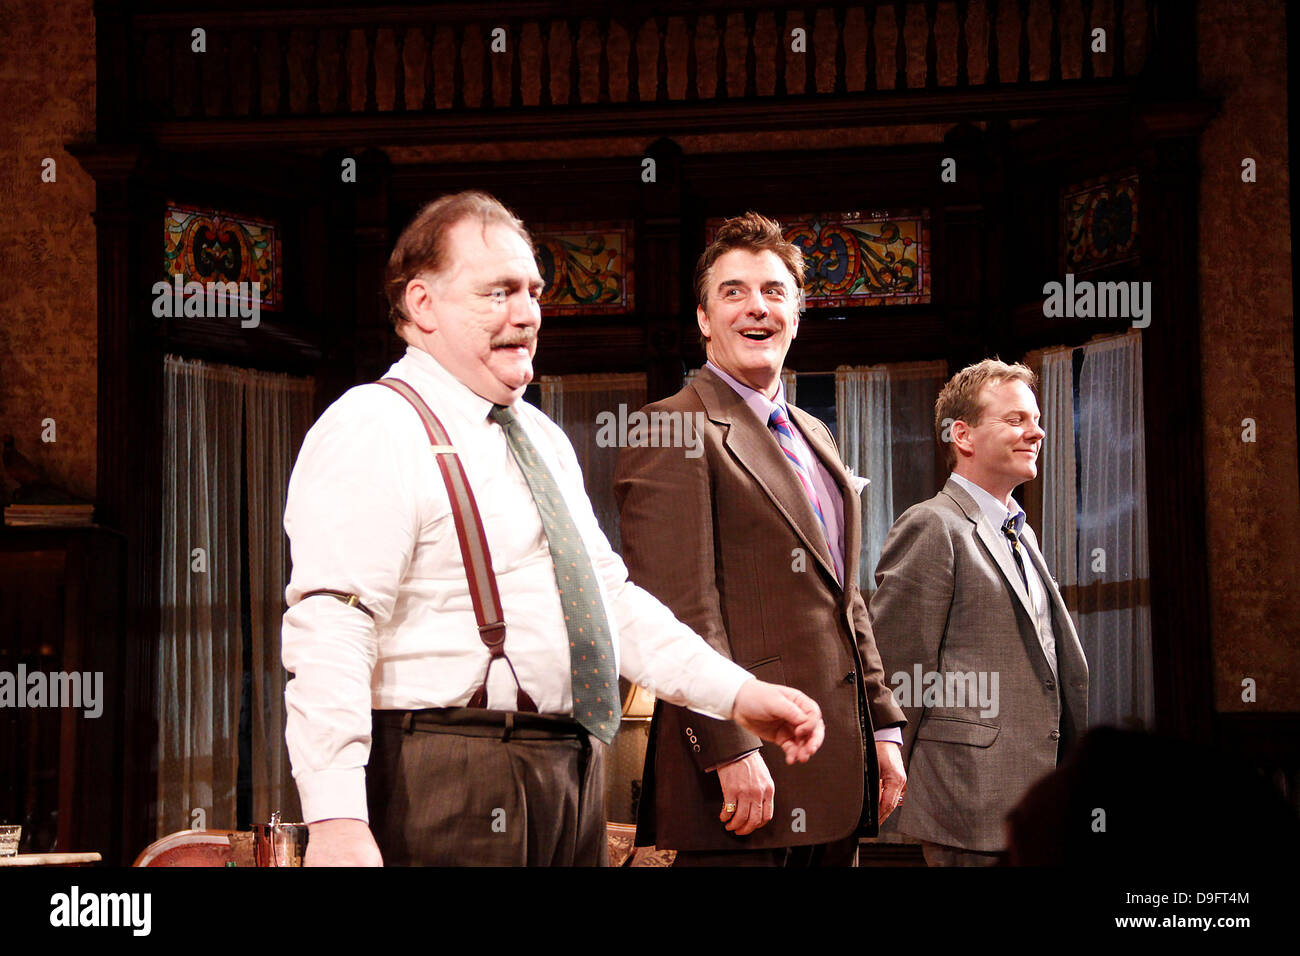 Brian Cox, Chris Noth and Kiefer Sutherland Opening night of the Broadway production of 'That Championship Season' at the Bernard B. Jacobs Theatre - Curtain Call. New York City, USA - 06.03.11 Stock Photo